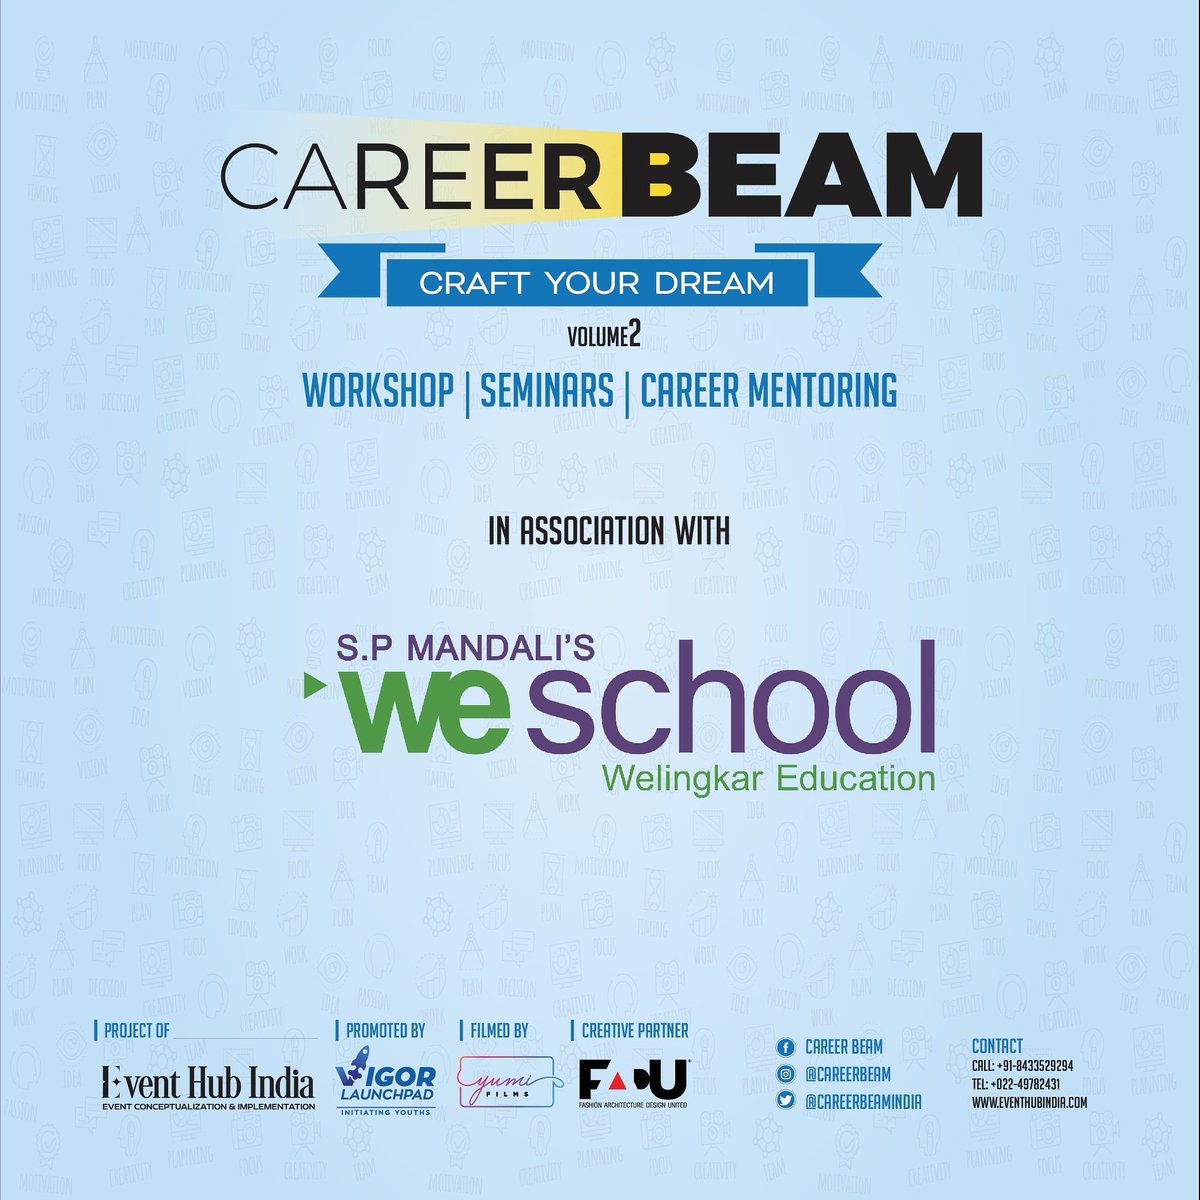 We are delighted to associate with We School for Career Beam: Craft Your Dream, Volume 2.

#CareerBeam #CraftYourDream #EducationFair
#Volume2 #Career #Dream #Passion #Opportunity #Youth #Students #Mumbai #WelingkarEducation